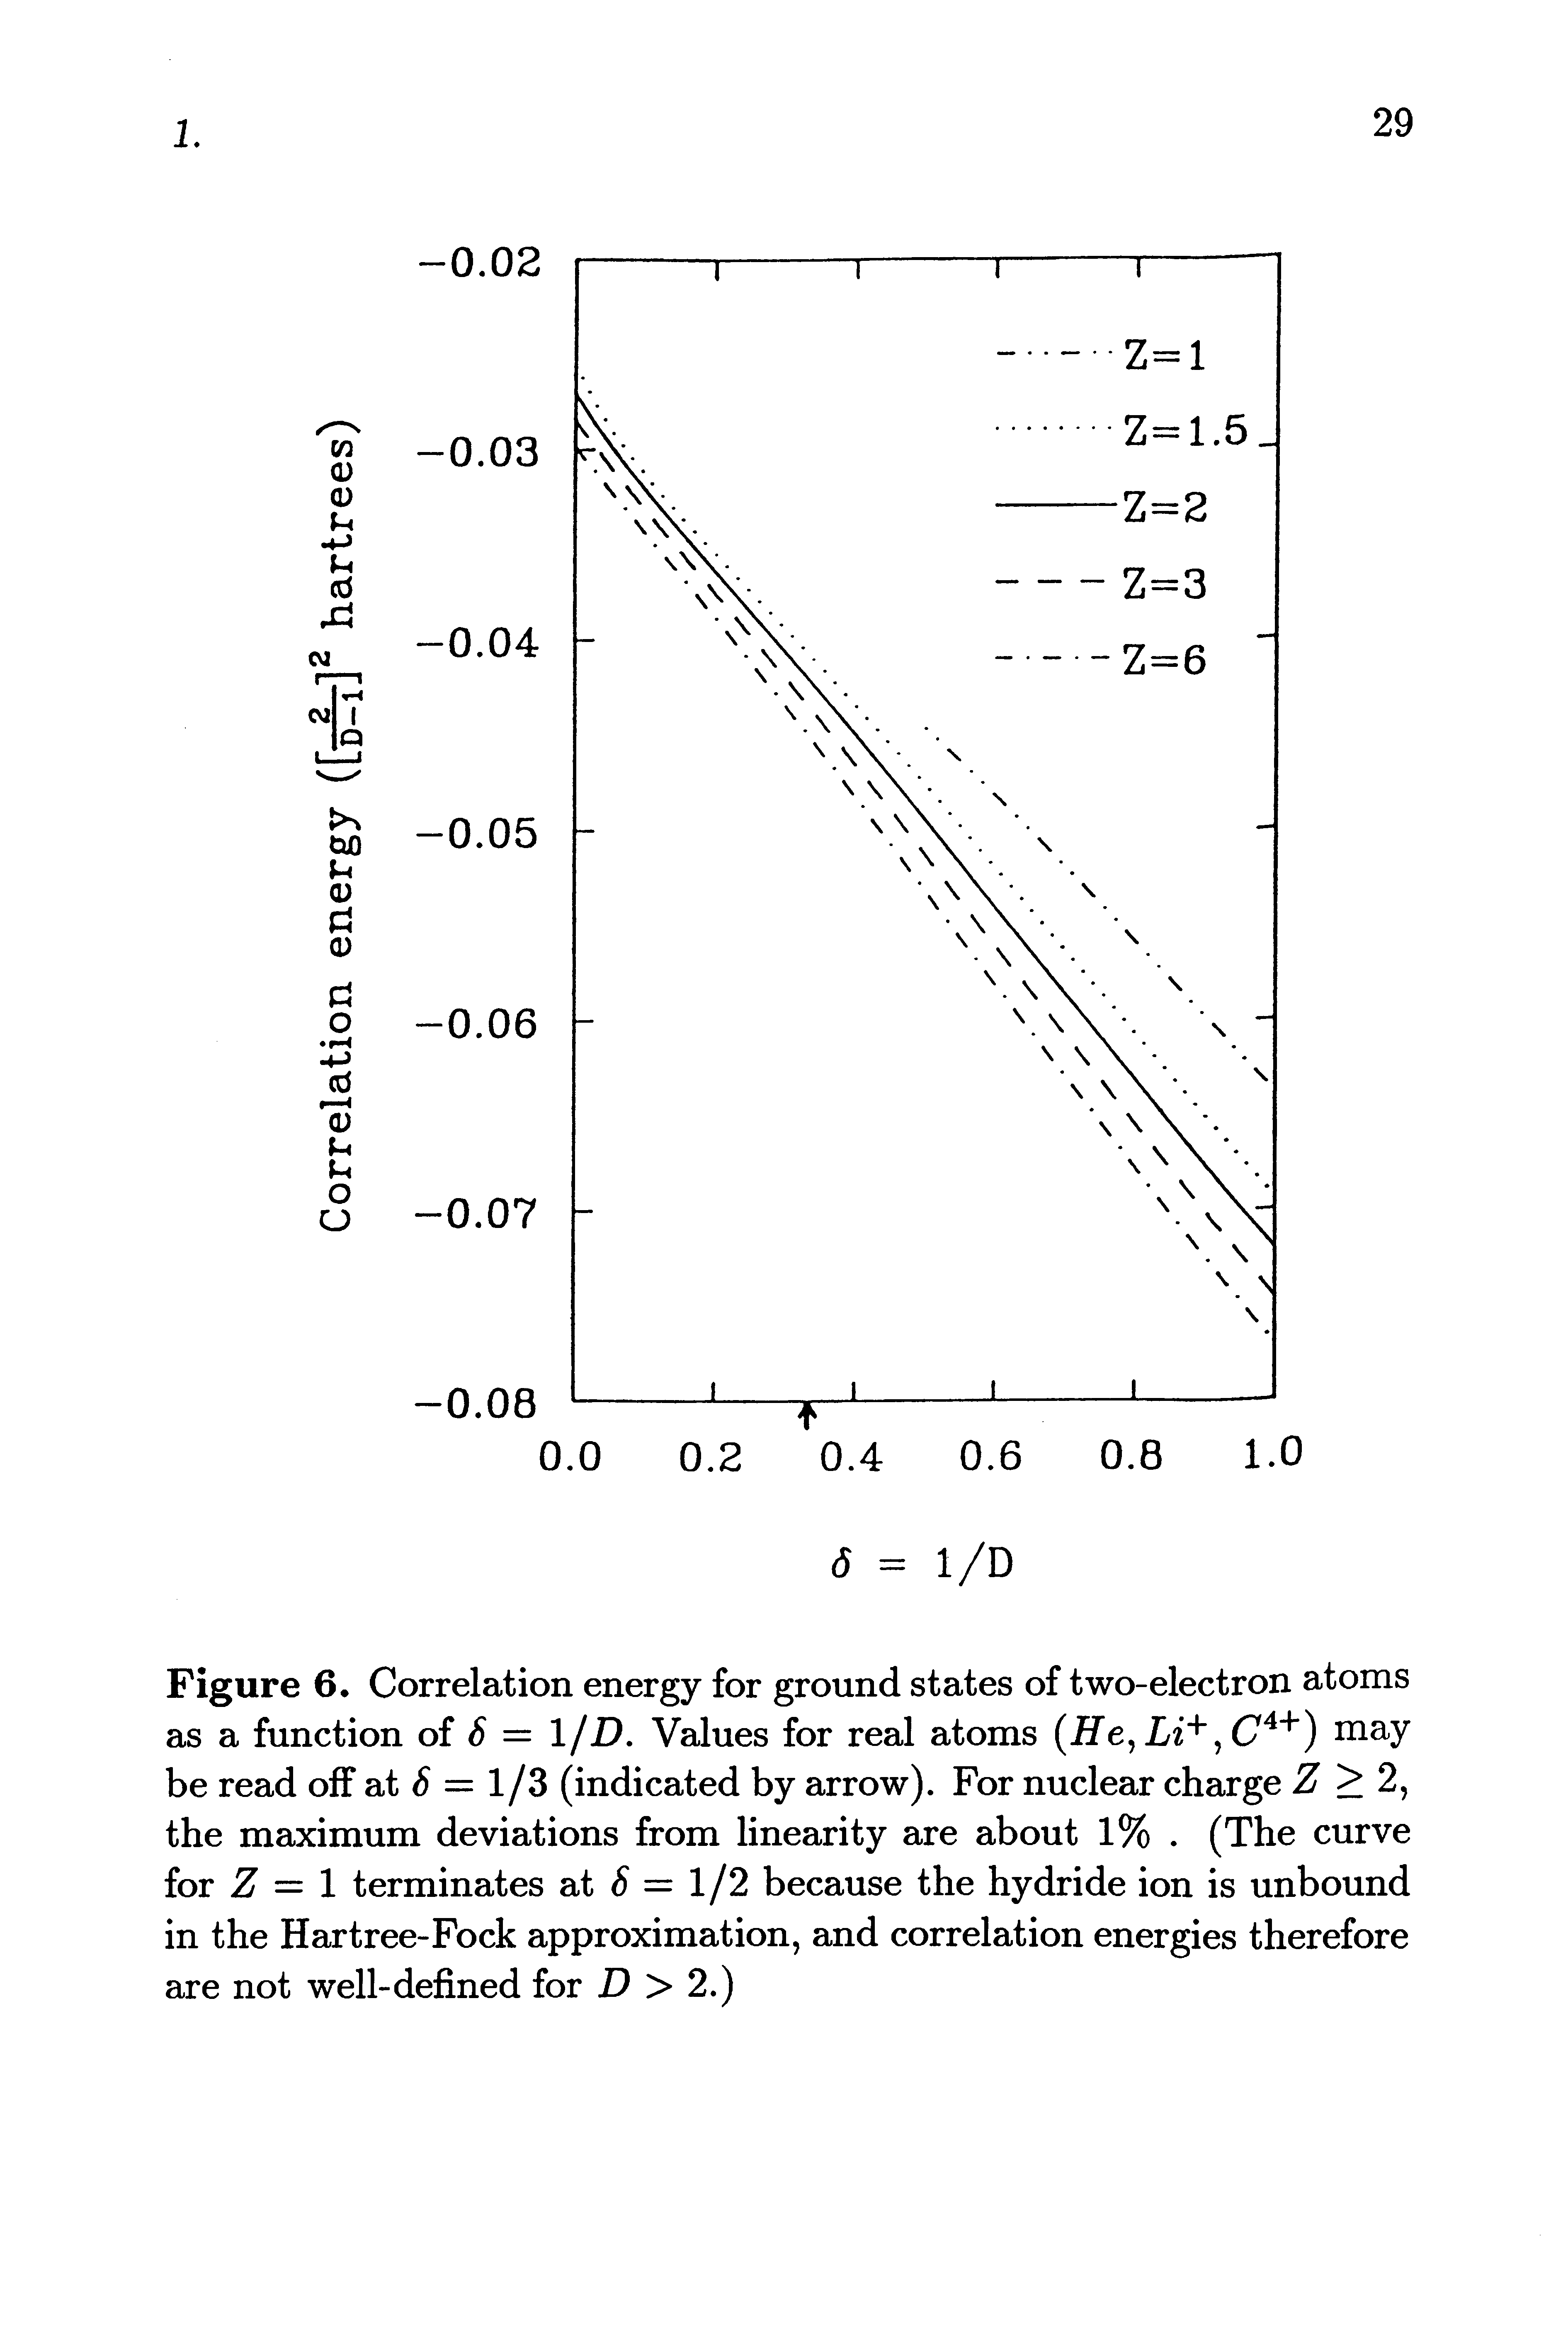 Figure 6. Correlation energy for ground states of two-electron atoms as a function of = 1/D. Values for real atoms Li" ", may be read off at = 1/3 (indicated by arrow). For nuclear charge Z >2, the maximum deviations from linearity are about 1%. (The curve for Z = 1 terminates at = 1/2 because the hydride ion is unbound in the Hartree-Fock approximation, and correlation energies therefore are not well-defined for D > 2.)...